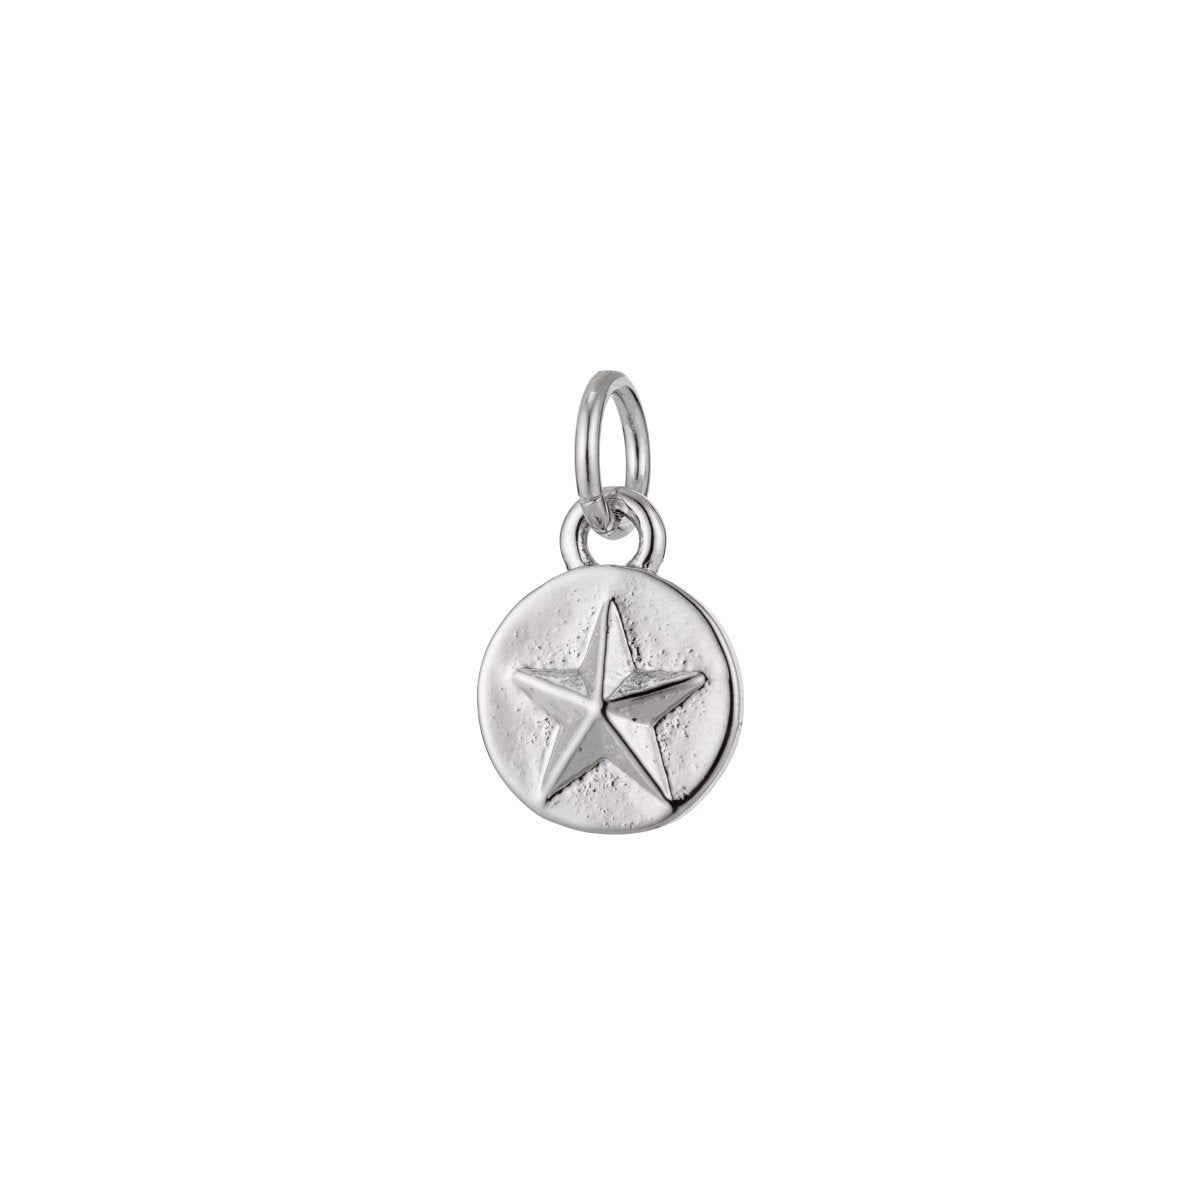 Star Ornament on Silver Circle Round Tag Coin Charm, Gold Filled Silver Colored Geometric Medallion Charm Pendant C-423 - DLUXCA